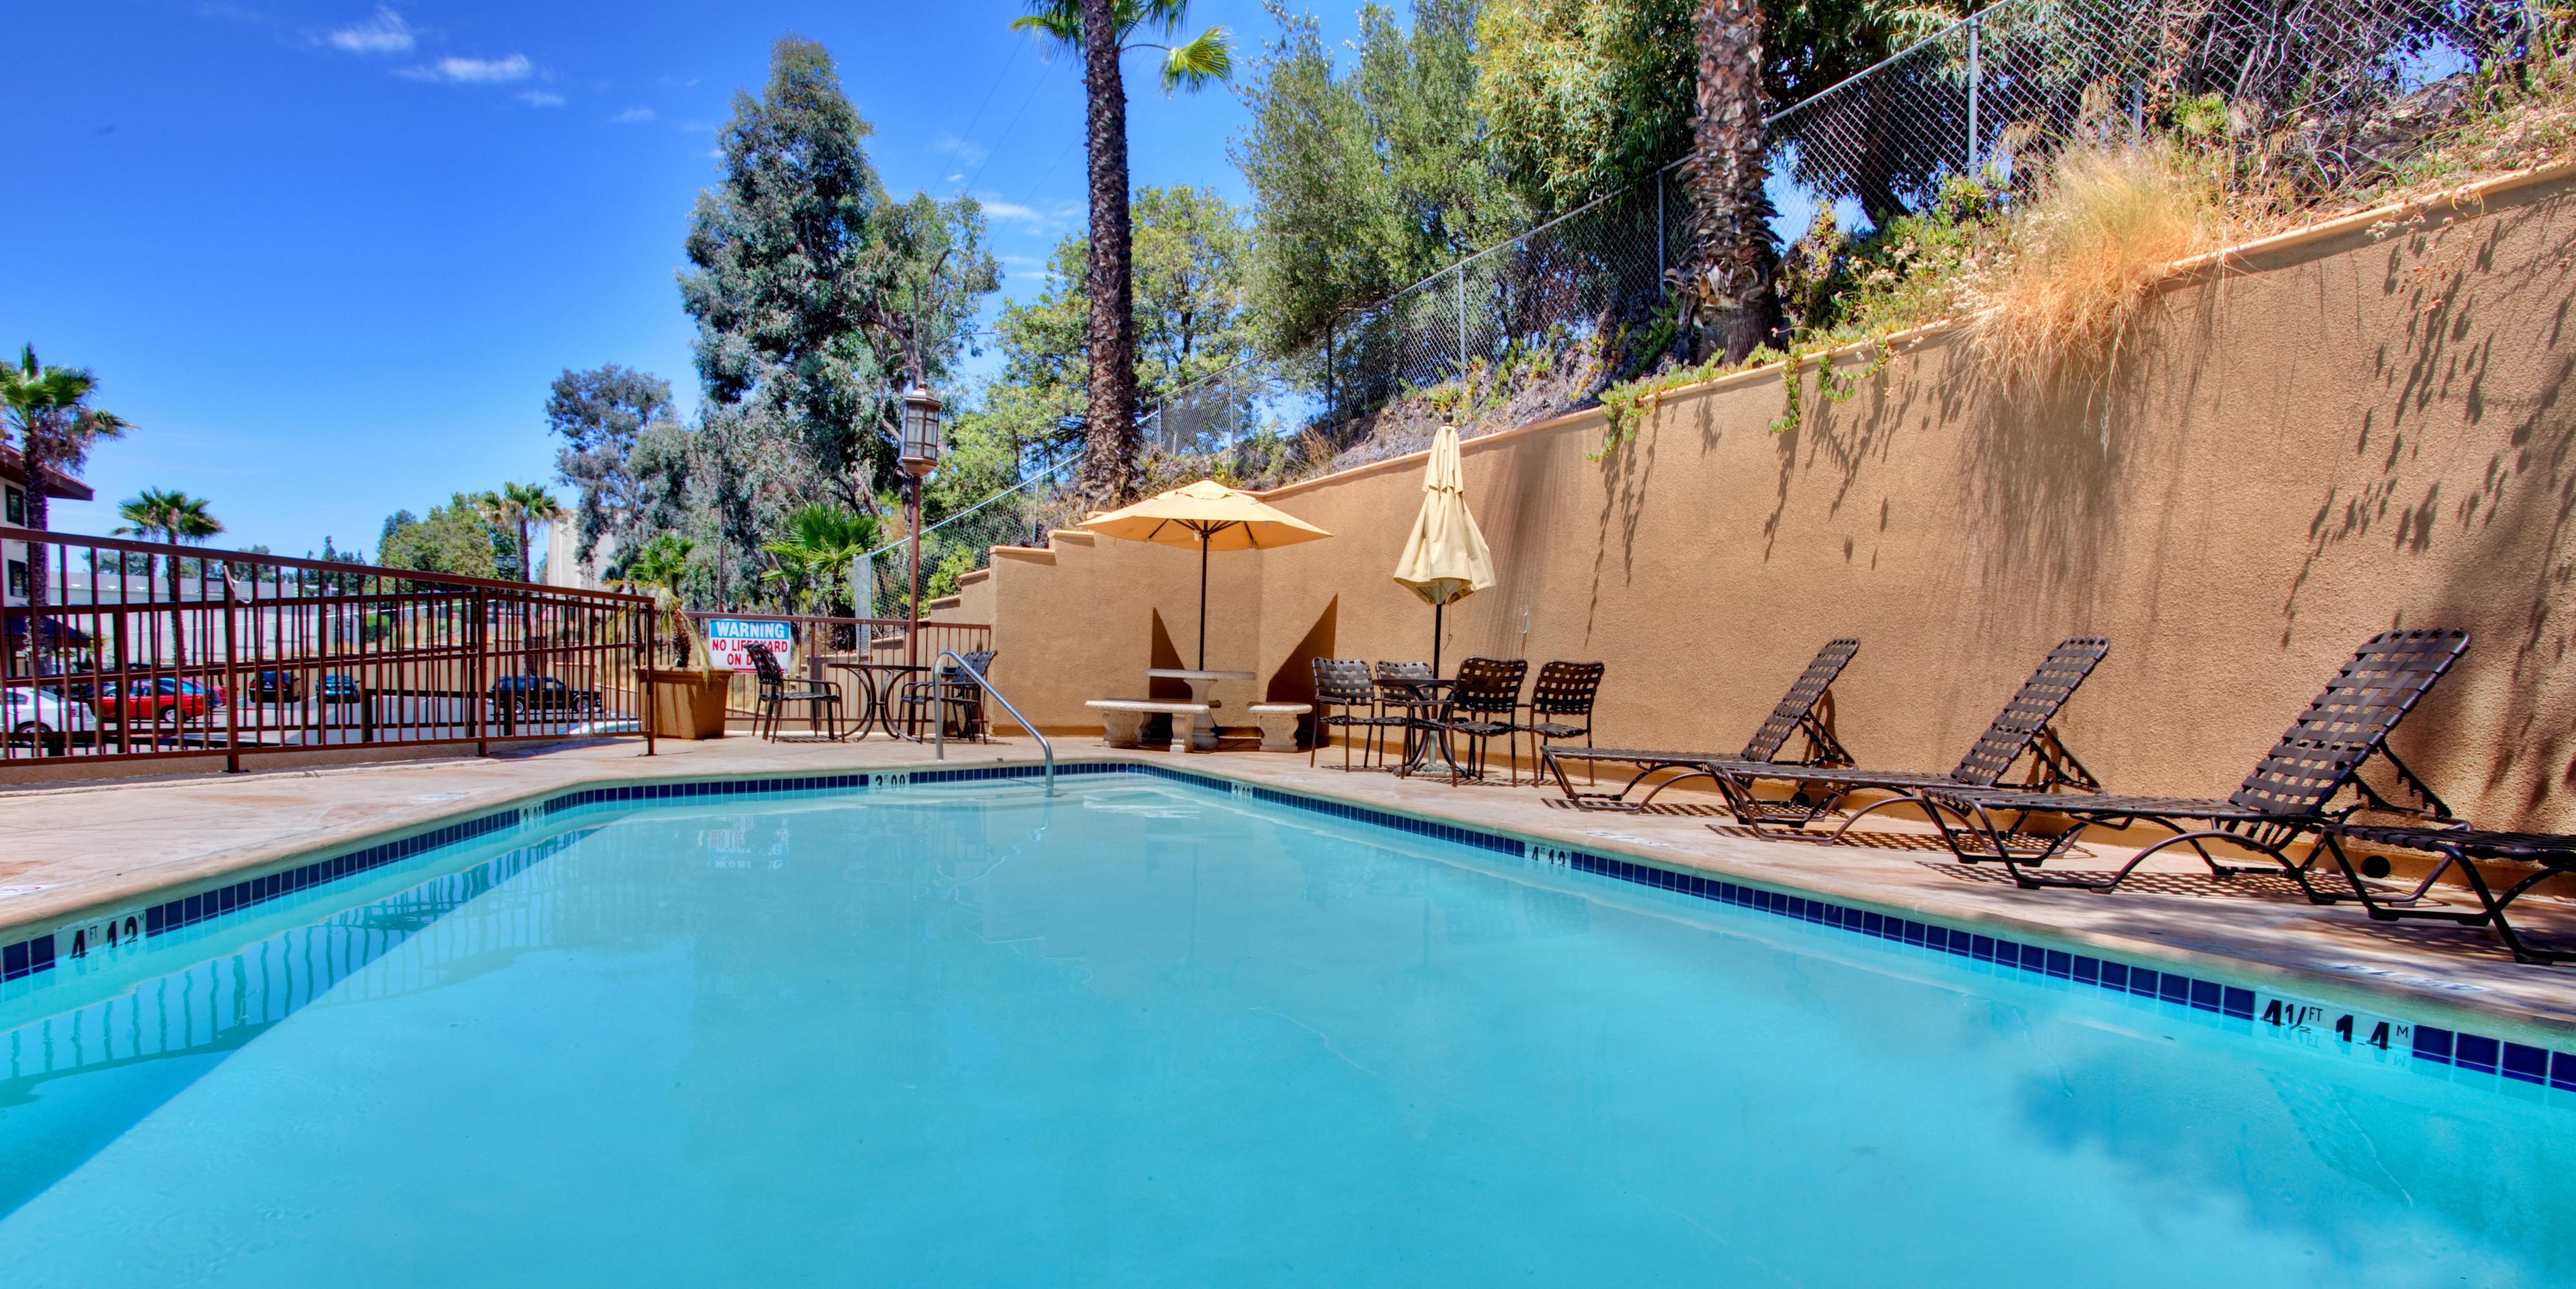 Escape the California heat, and take a dip in our outdoor pool! Open year round.